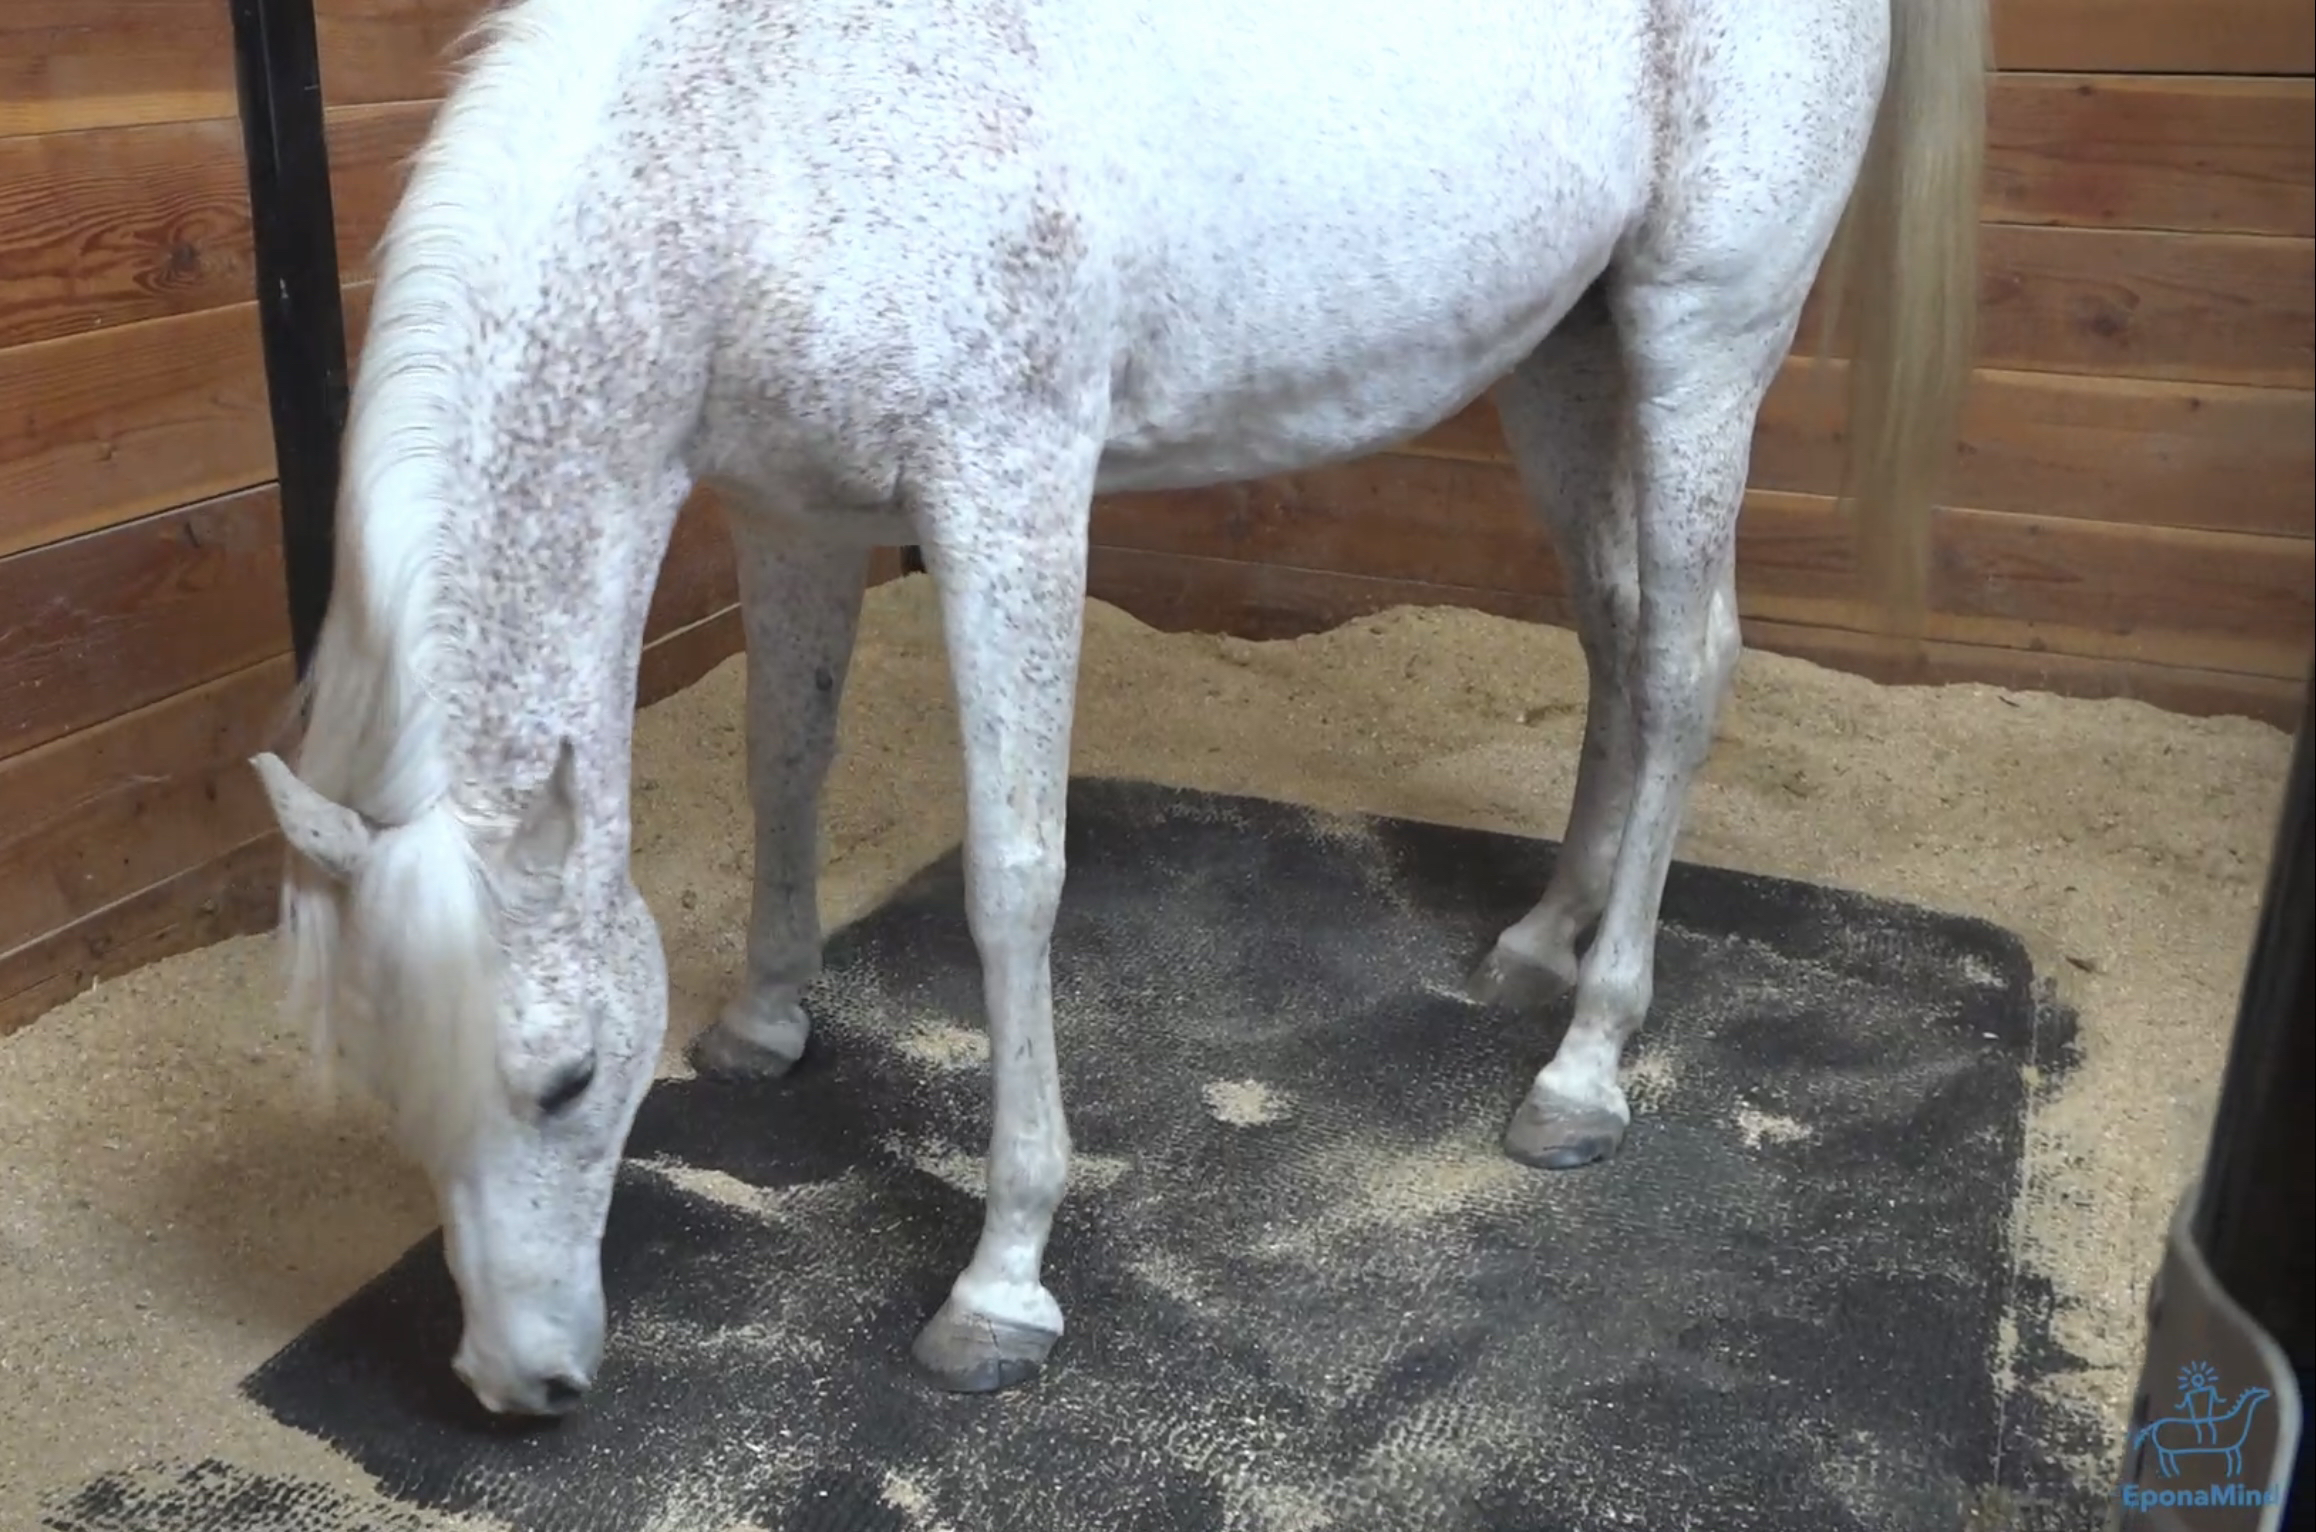 A horse examine the stall mattress in its stall.